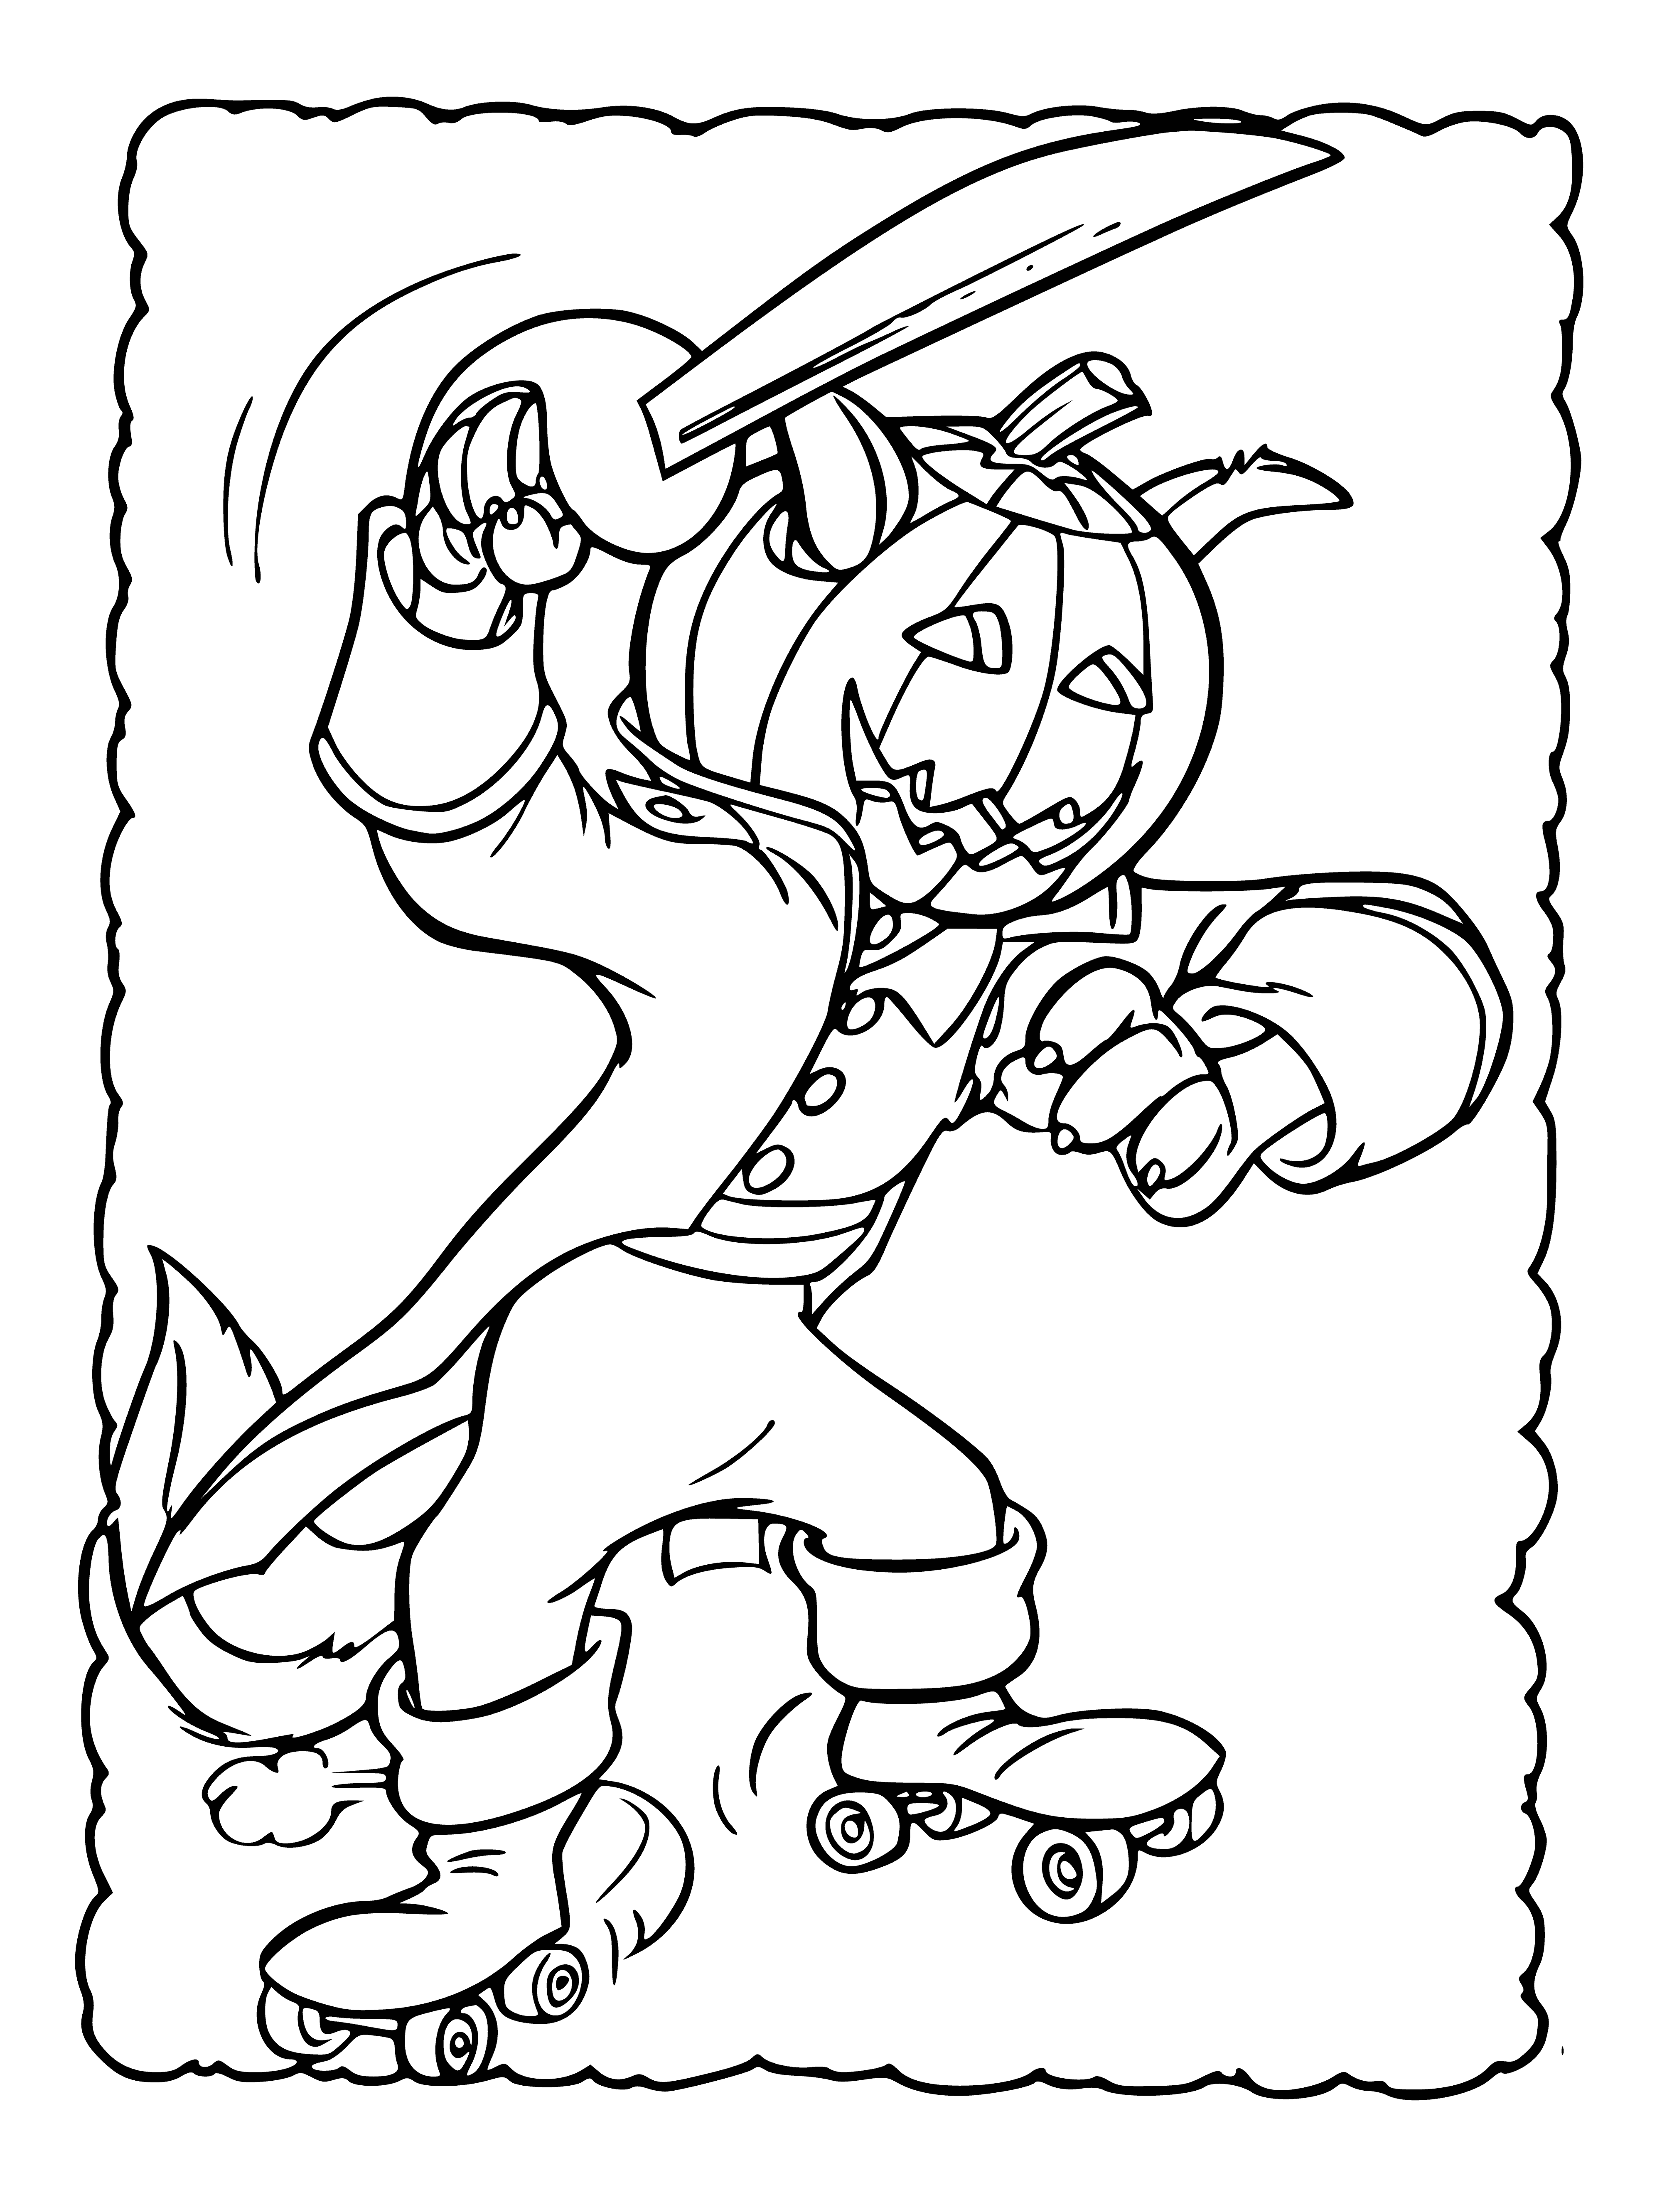 Head pirate coloring page